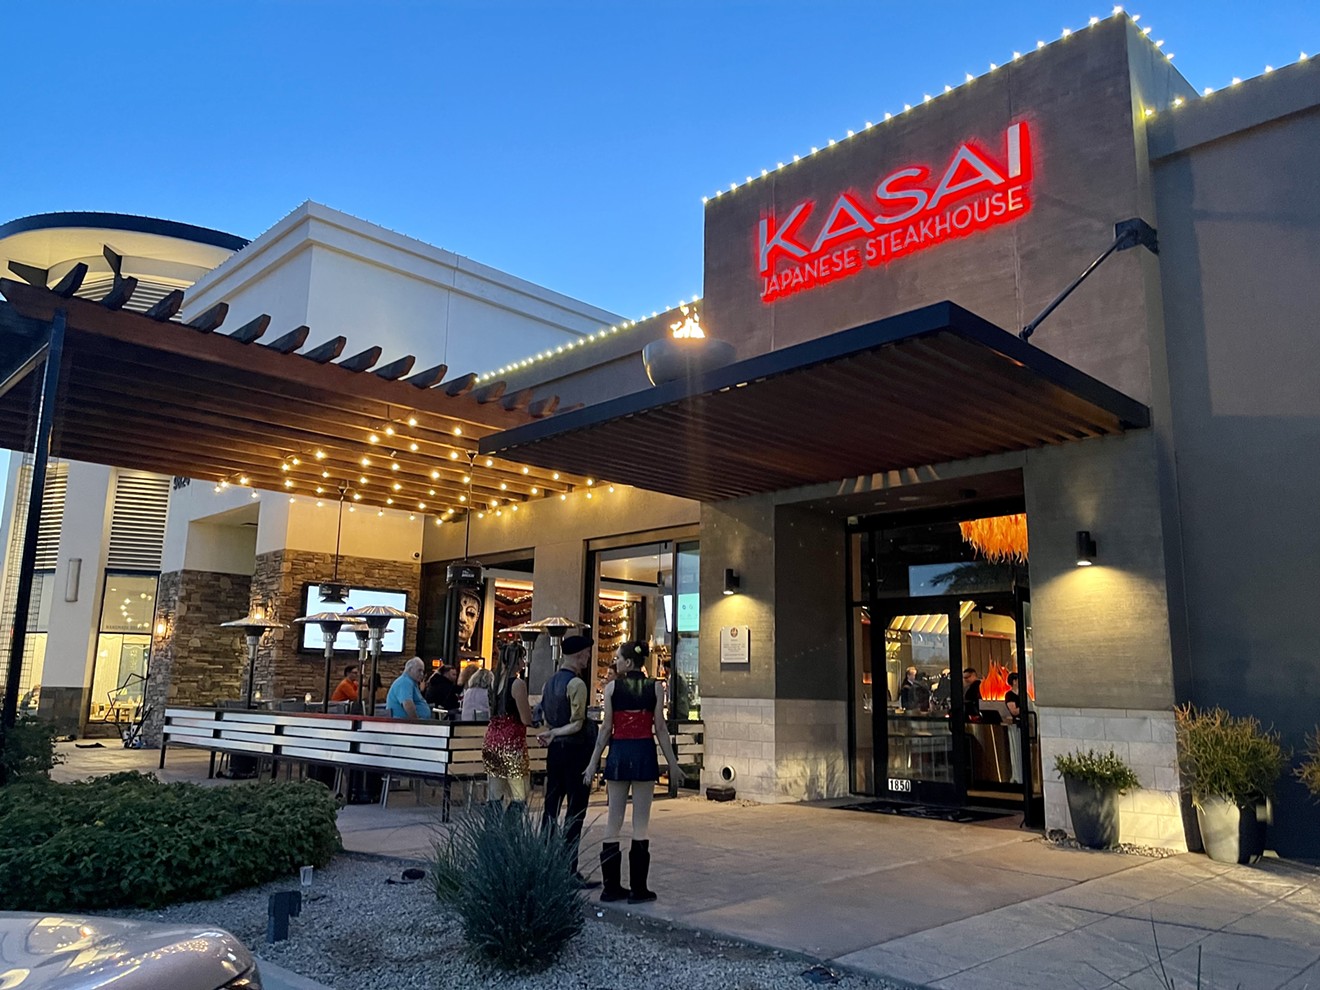 Kasai Japanese Steakhouse is now open in the Peoria shopping center Park West.